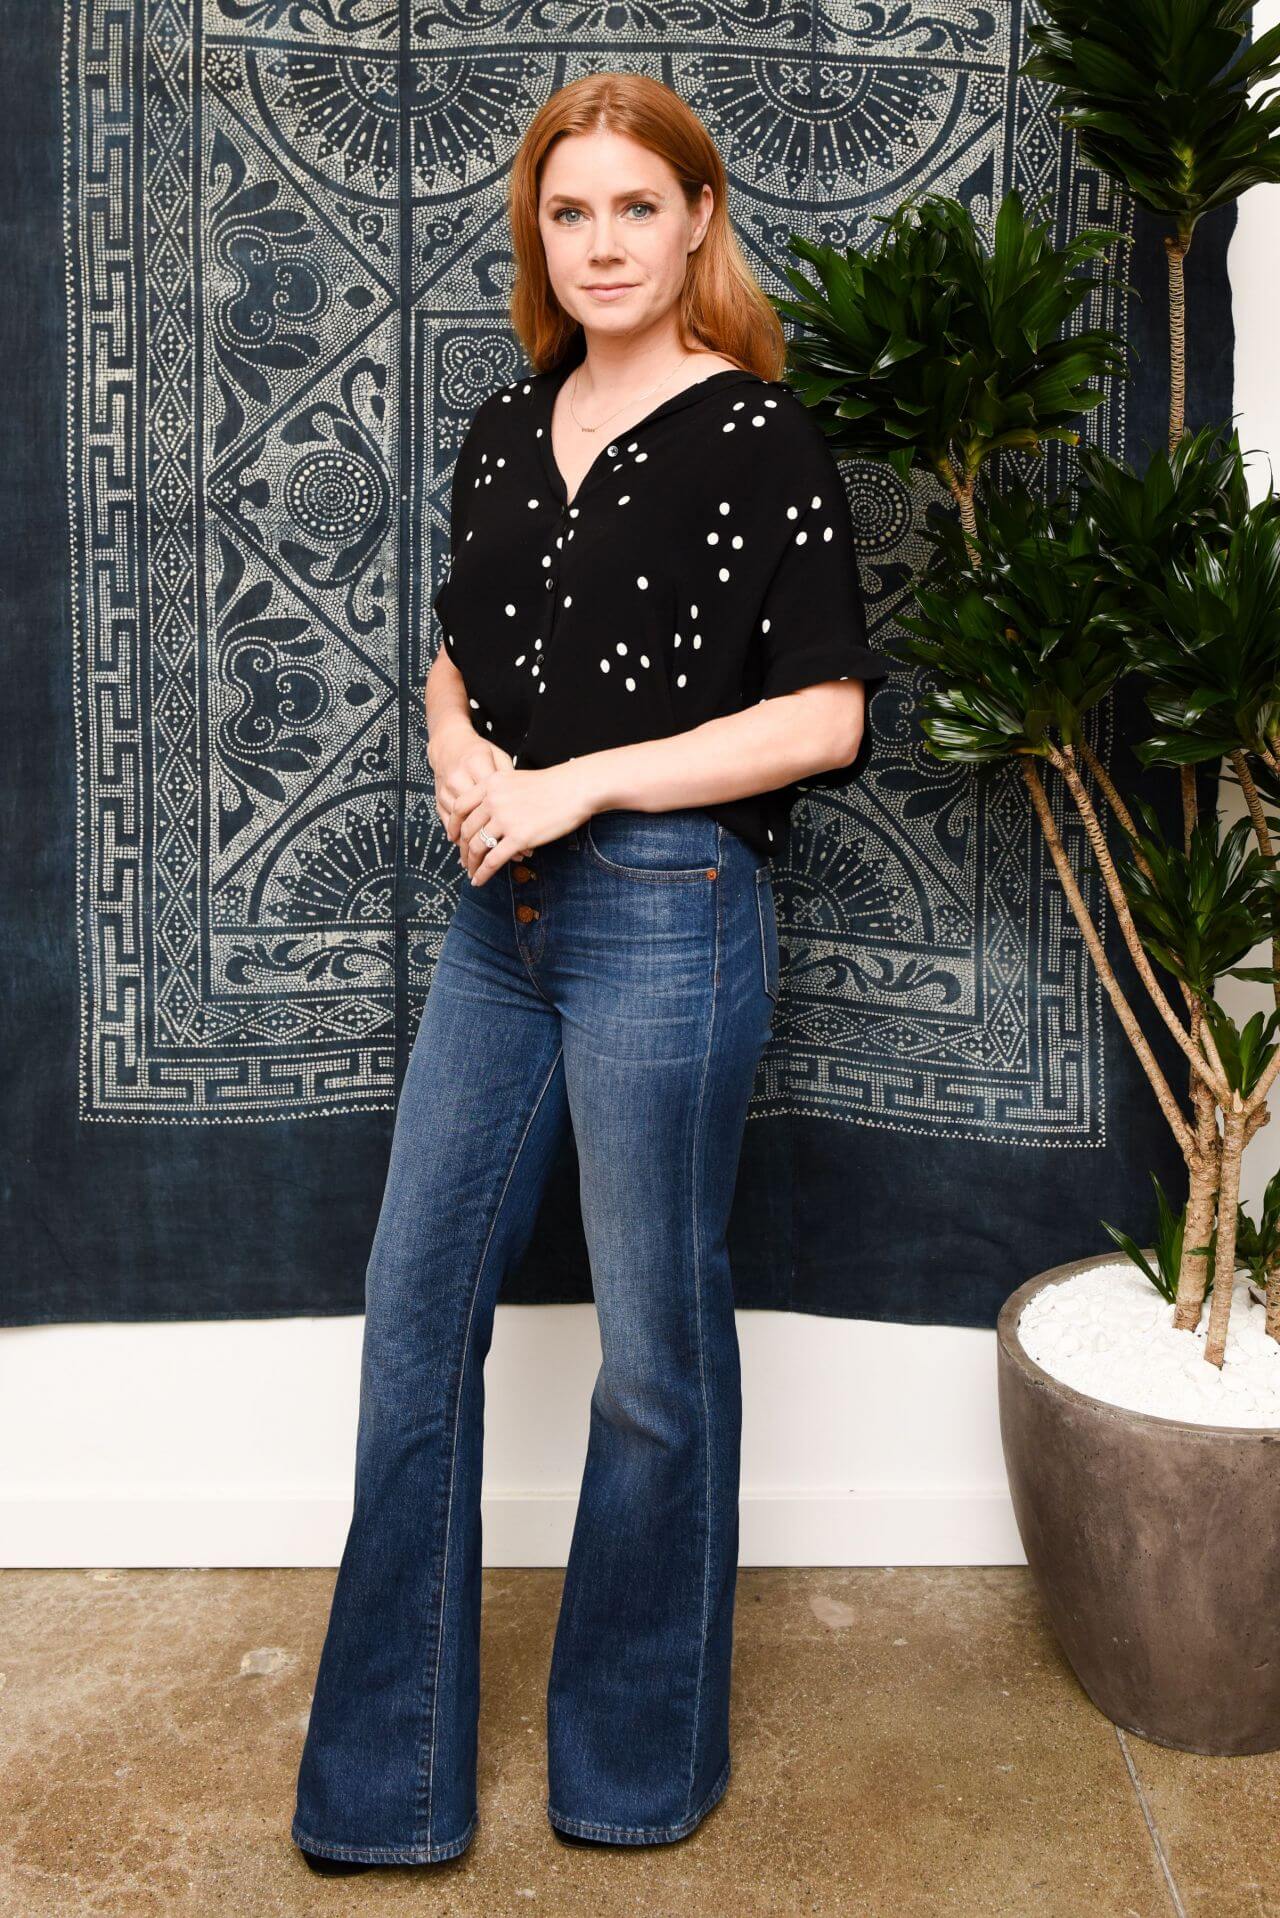 Amy Adams In Black Polka Dot Top With Blue Denim Jeans At ‘Madewell Celebrates the Holidays in Los Angeles